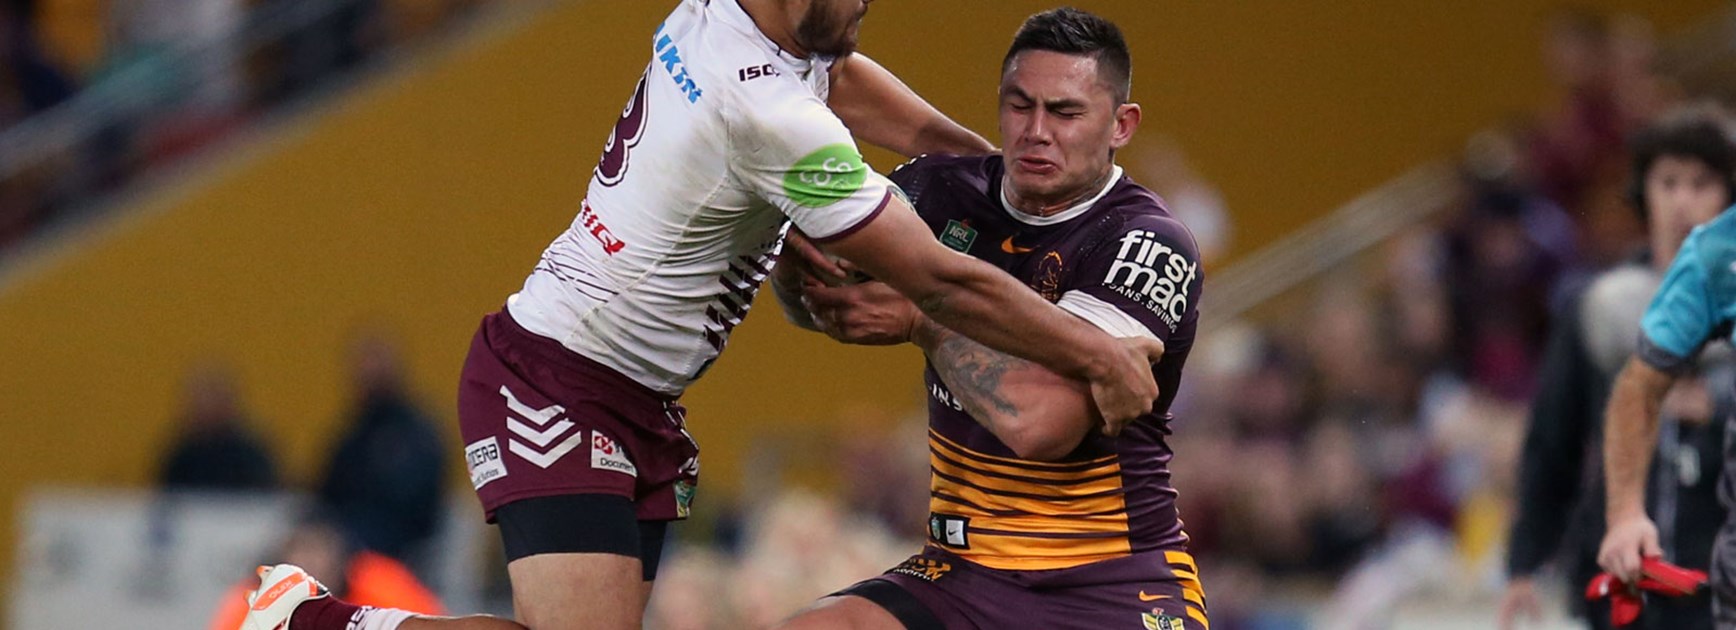 Broncos winger Daniel Vidot breaks yet another tackle during his side's big Round 13 win.